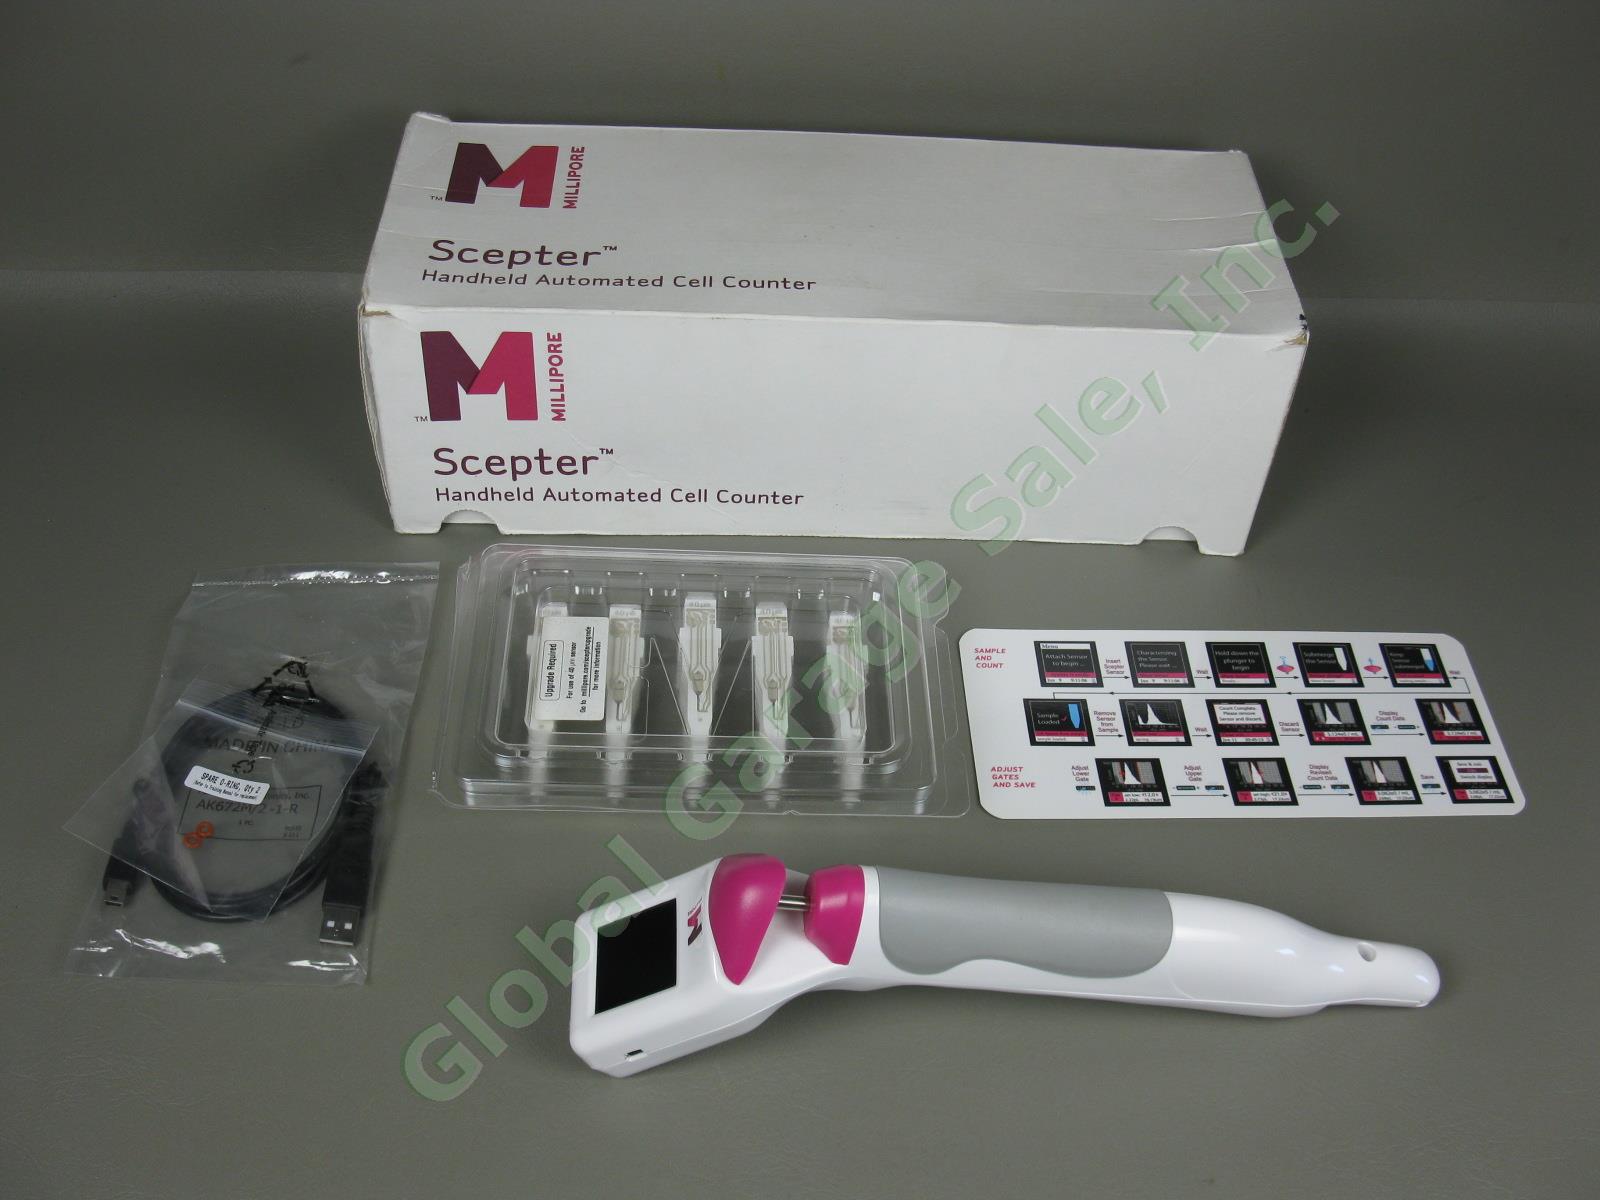 Millipore Scepter Handheld Automated Cell Counter Version 1.7-72 w/Sensors + Box